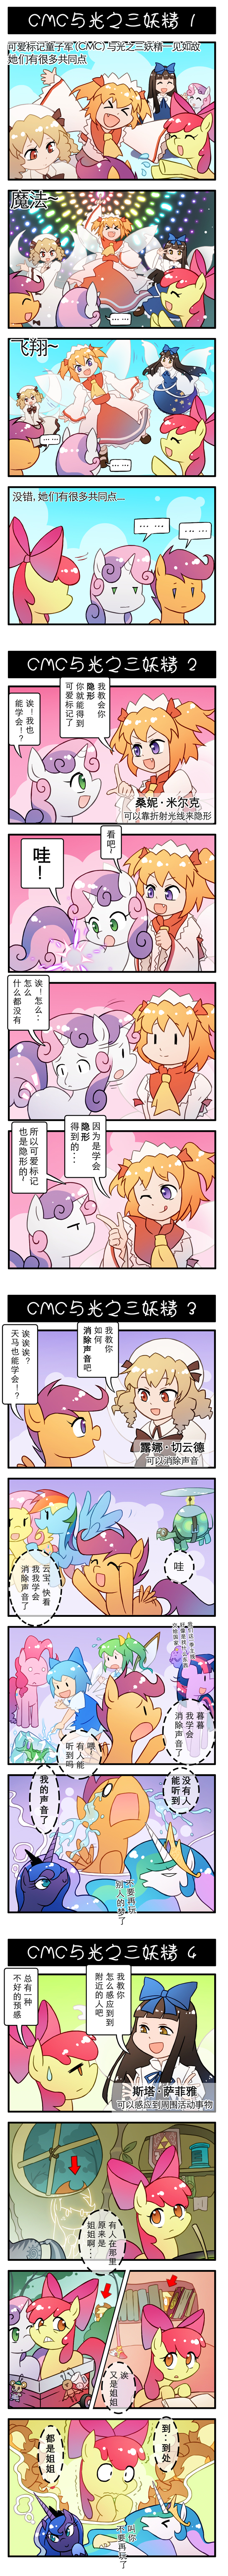 &gt;_&lt; 3girls 4koma 5girls :d ^_^ absurdres adventure_time apple_bloom applejack ascot blonde_hair blue_hair bow brown_eyes brown_hair cardcaptor_sakura celestia_(my_little_pony) chinese cirno closed_eyes comic commentary crossover daiyousei drill_hair energy_tank fairy_wings flying fuuin_no_tsue green_hair gummy_(my_little_pony) hair_bow hair_ribbon hat hibike!_euphonium highres ice ice_wings long_hair long_image lumpy_space_princess luna_(my_little_pony) luna_child moffle multiple_4koma multiple_girls my_little_pony my_little_pony_friendship_is_magic open_mouth pony ribbon rockman scootaloo shield smile star_sapphire sunny_milk sweetie_belle tall_image tank_(my_little_pony) the_legend_of_zelda the_mask touhou translated triforce two_side_up unicorn wings xd xin_yu_hua_yin zecora